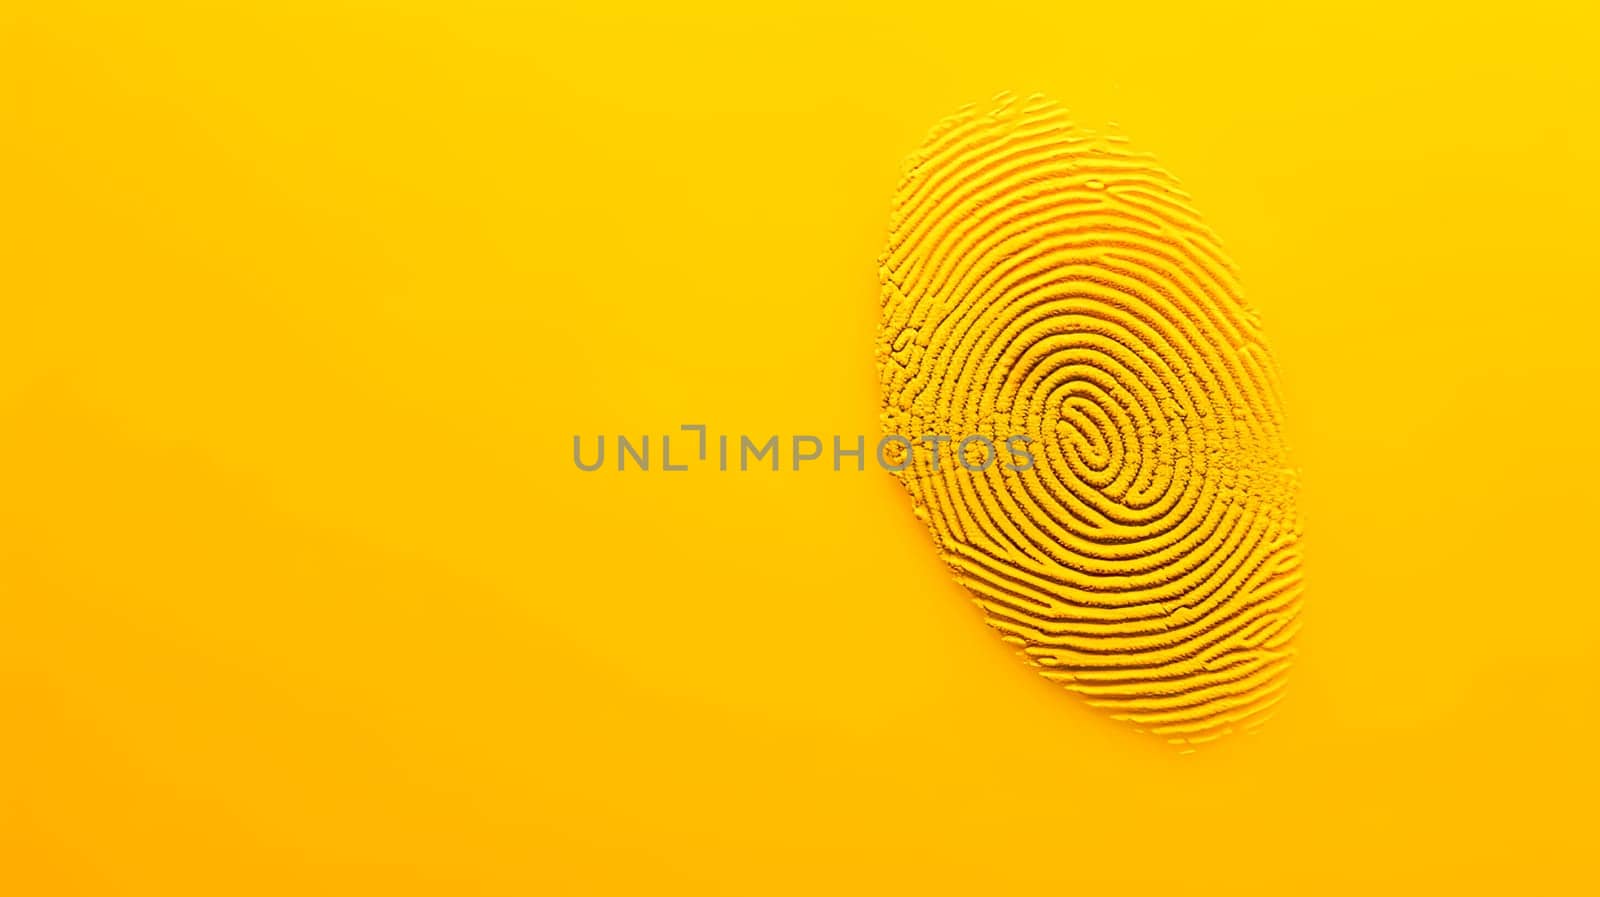 Unique Yellow Fingerprint Illustration for Biometric Security and Identity Verification, copy space